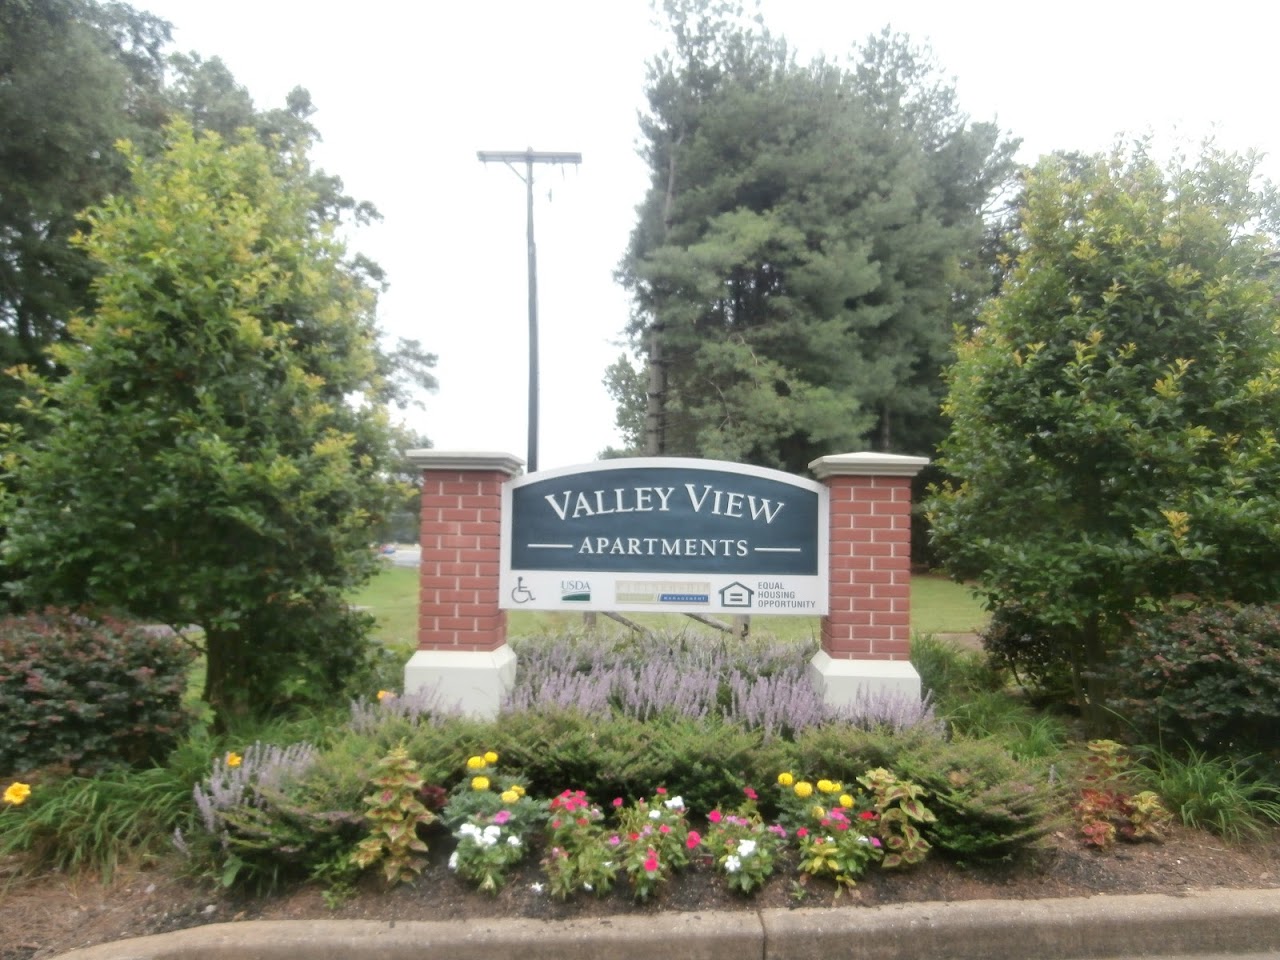 Photo of VALLEY VIEW APTS. Affordable housing located at 201 VALLEY VIEW RD FOUNTAIN INN, SC 29644